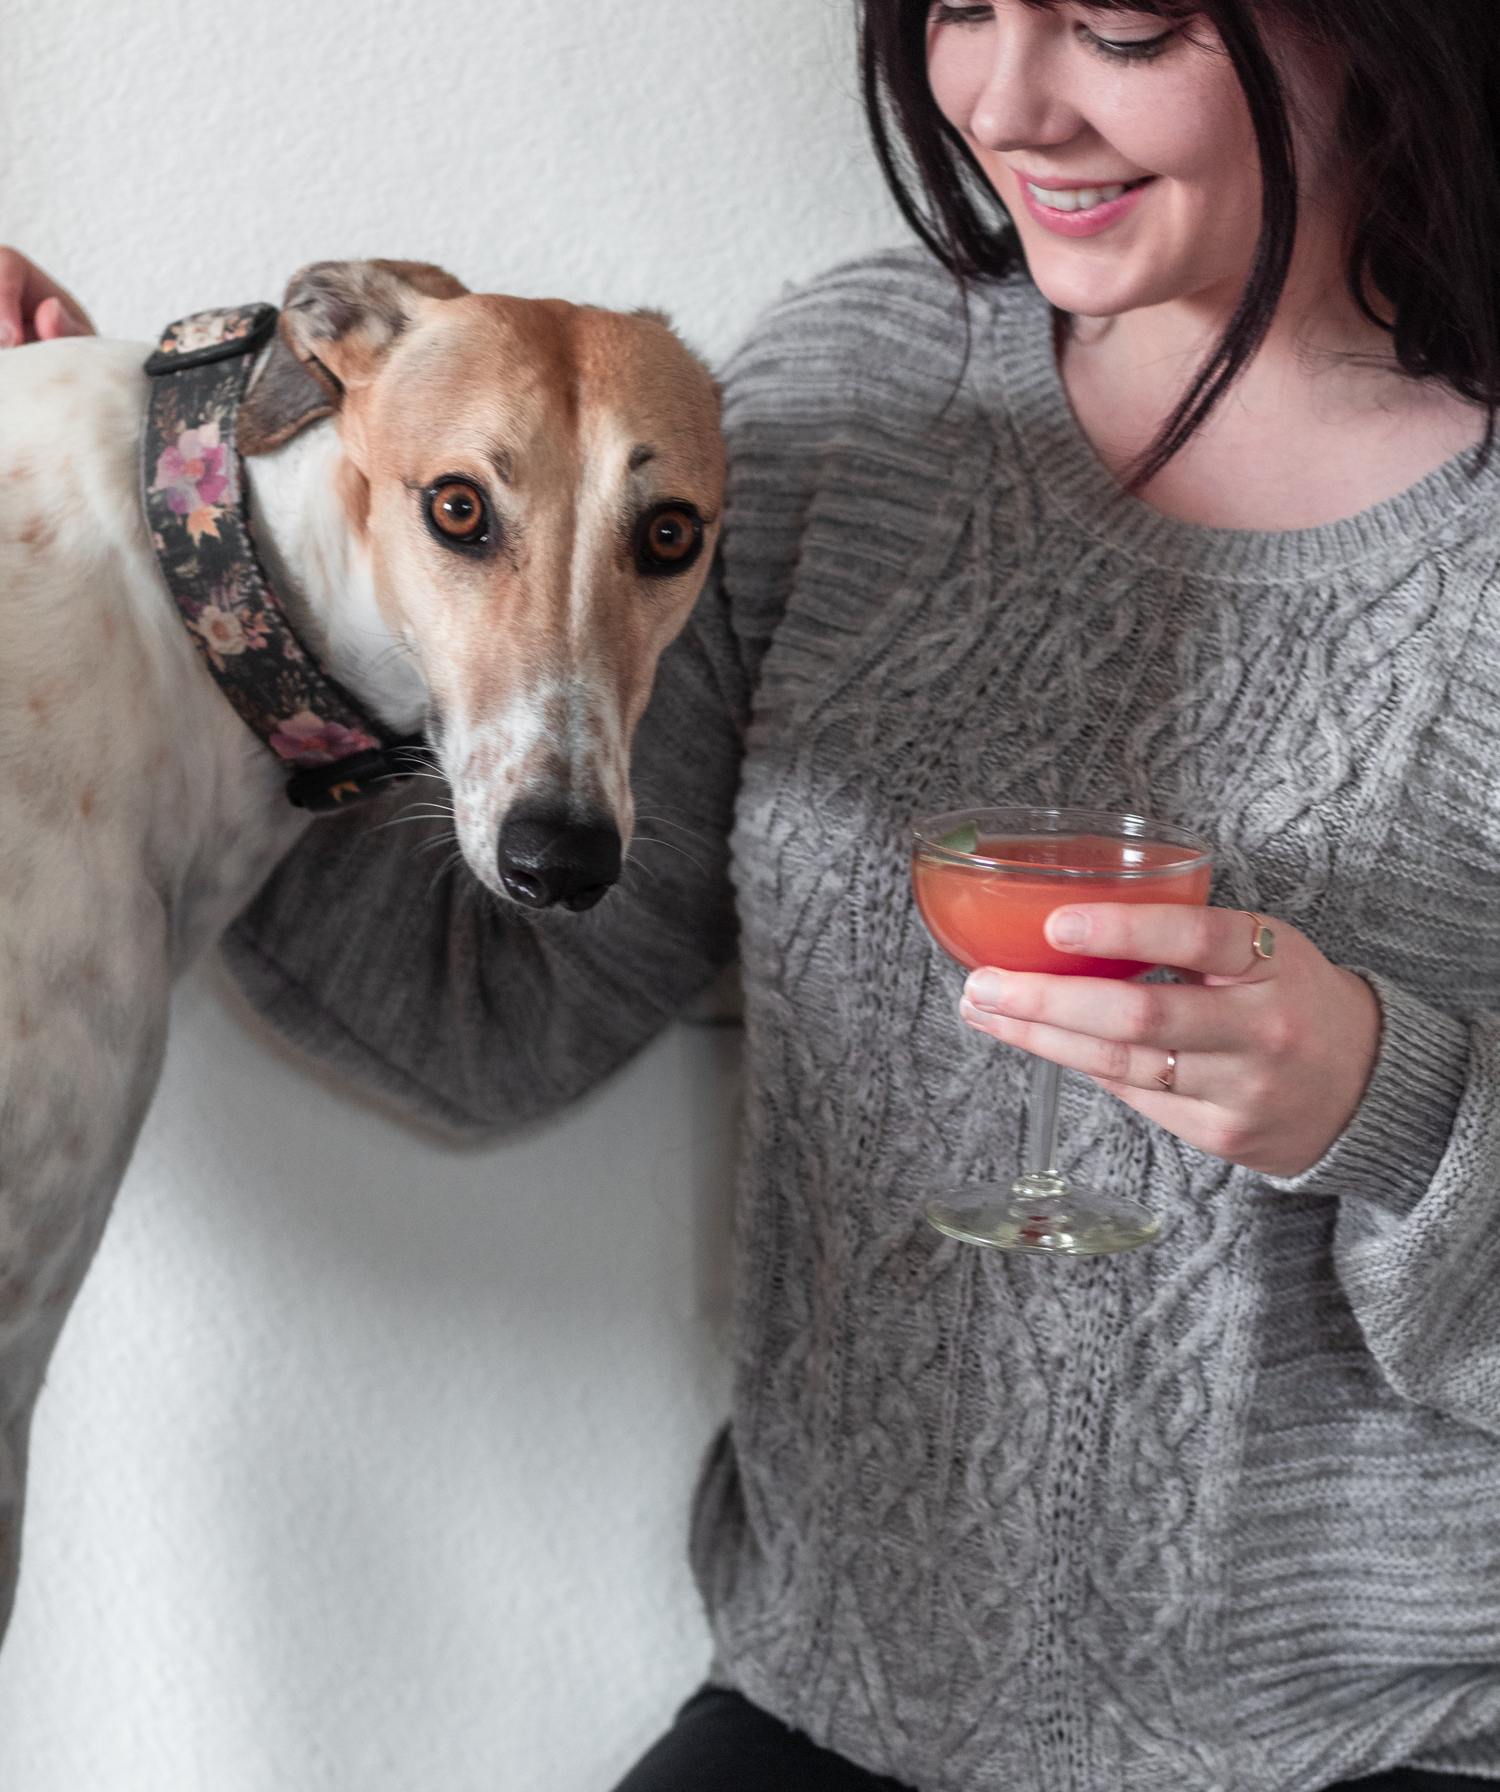 A side image of a woman wearing a grey sweater holding a pink cocktail in a coupe glass and petting a red and white greyhound dog.